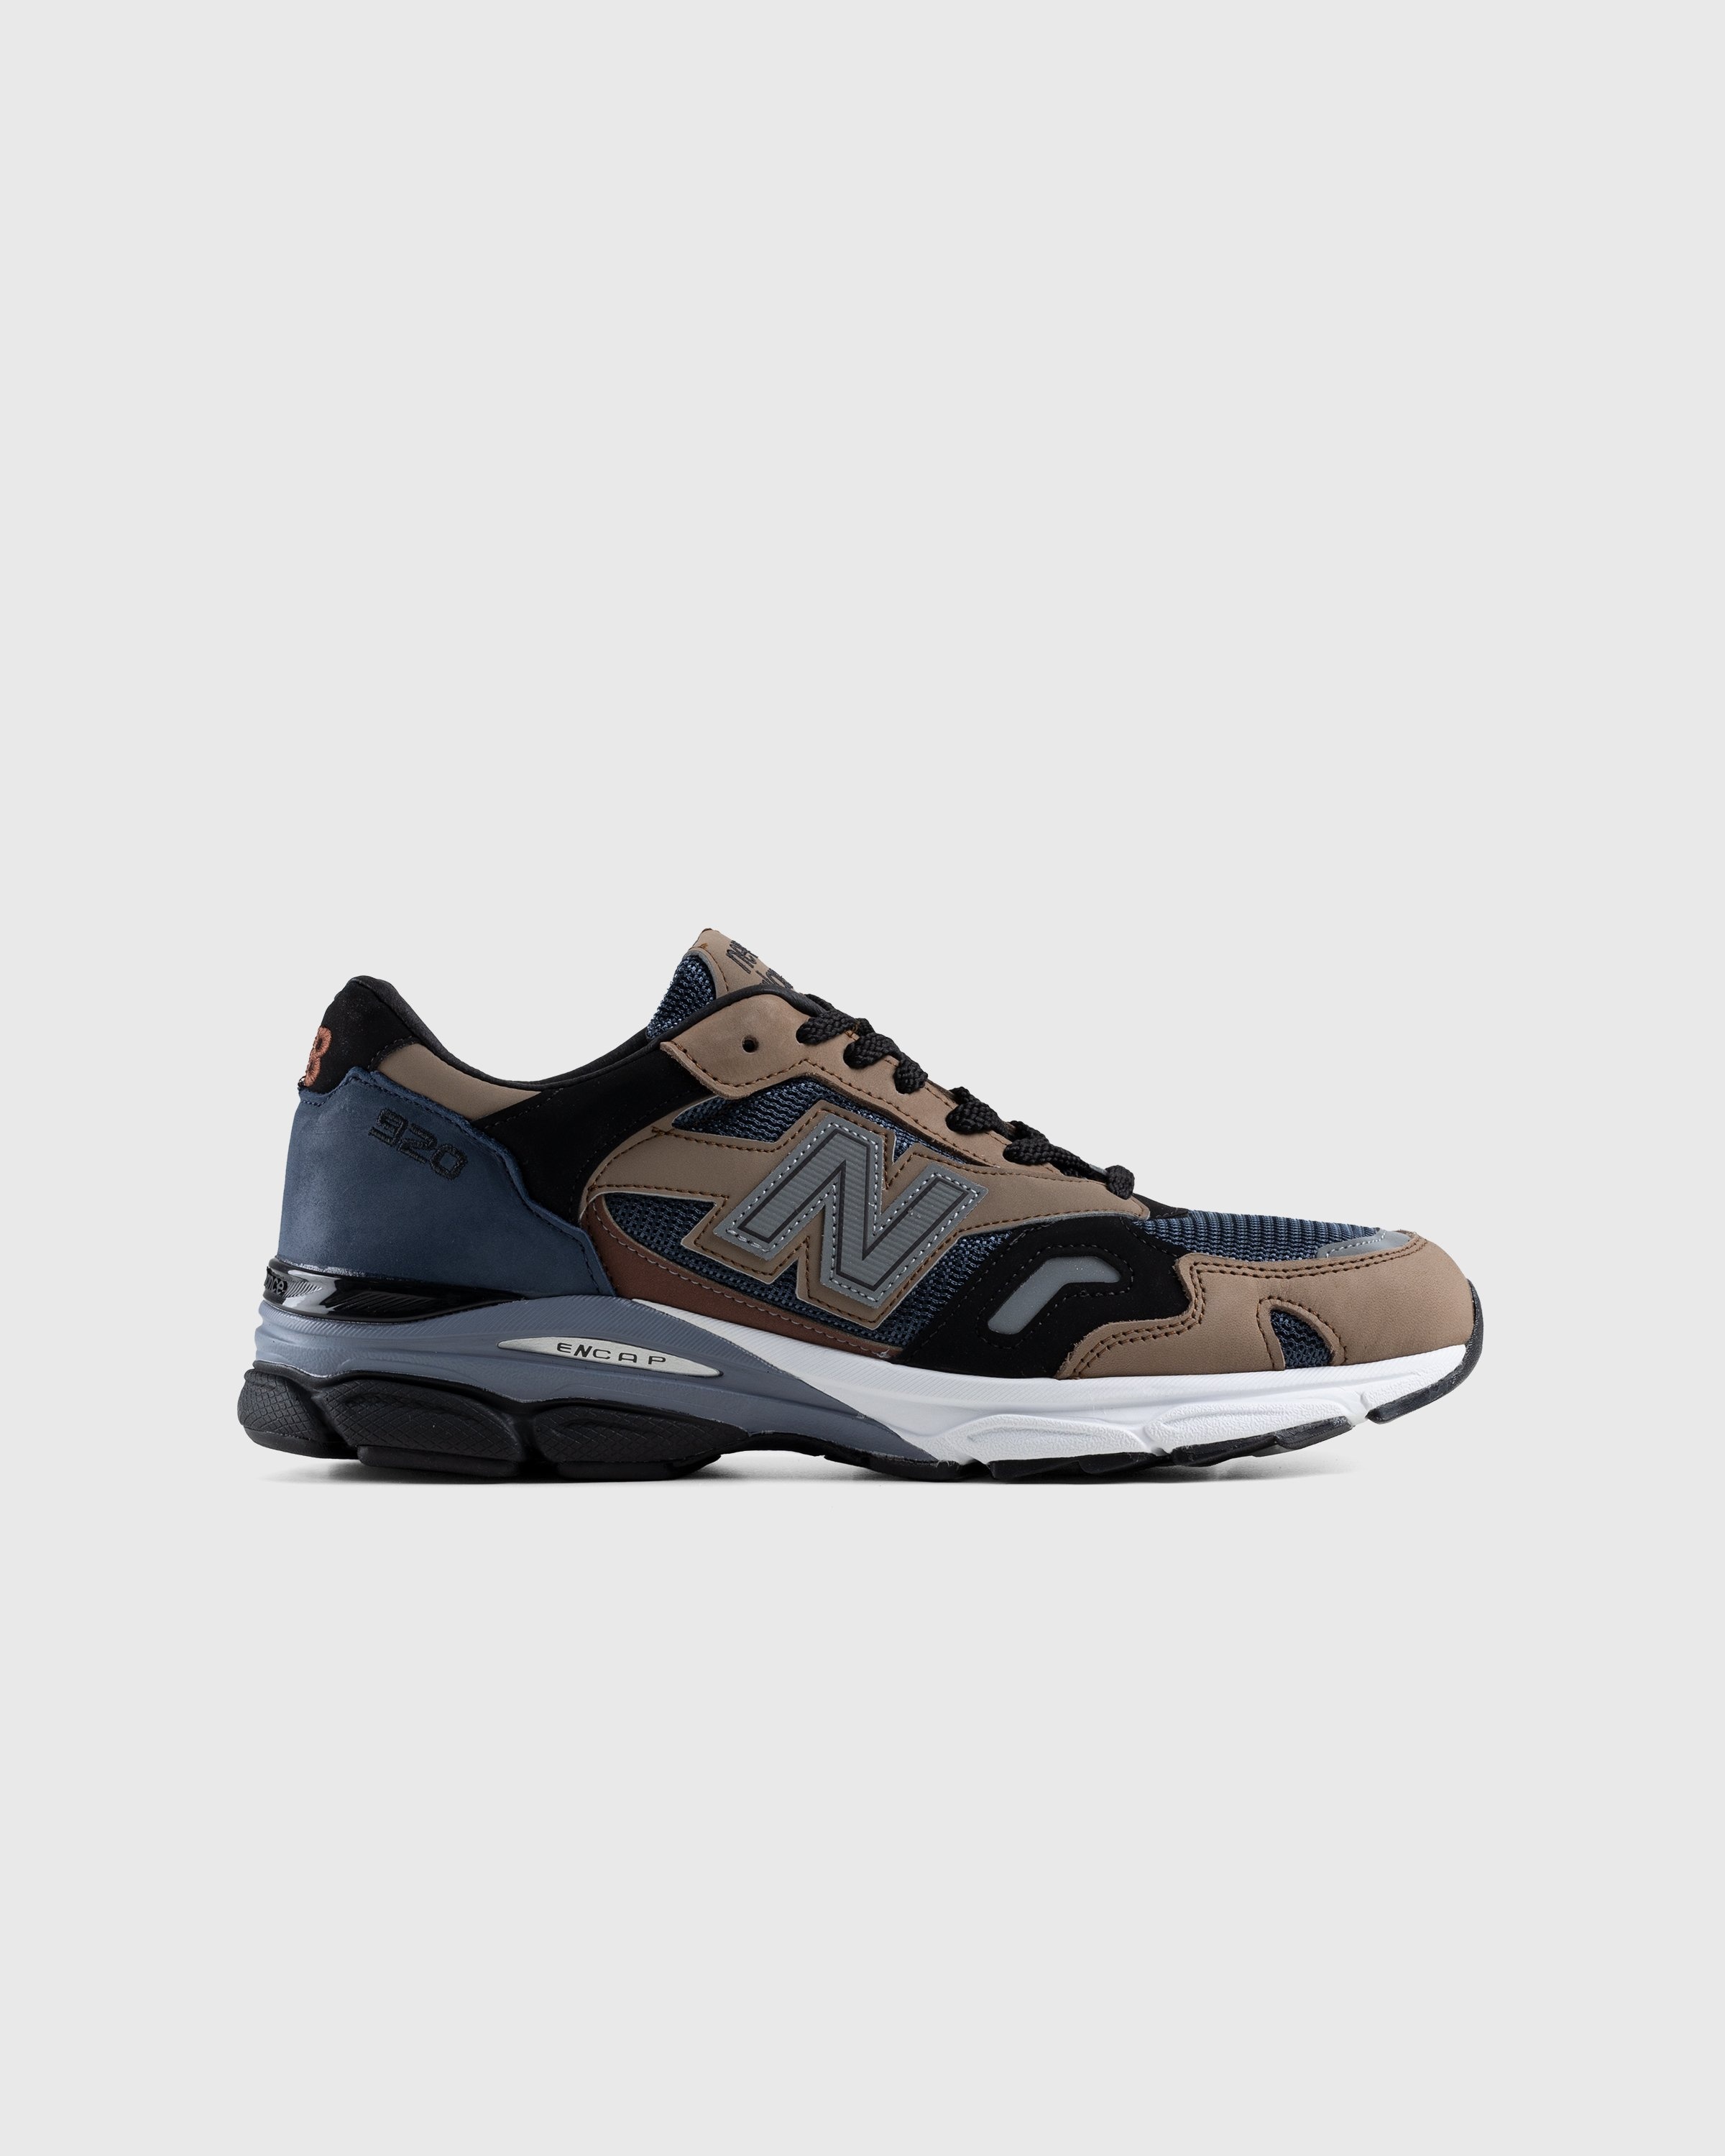 New Balance – M920INV Navy/Black - Low Top Sneakers - Blue - Image 1